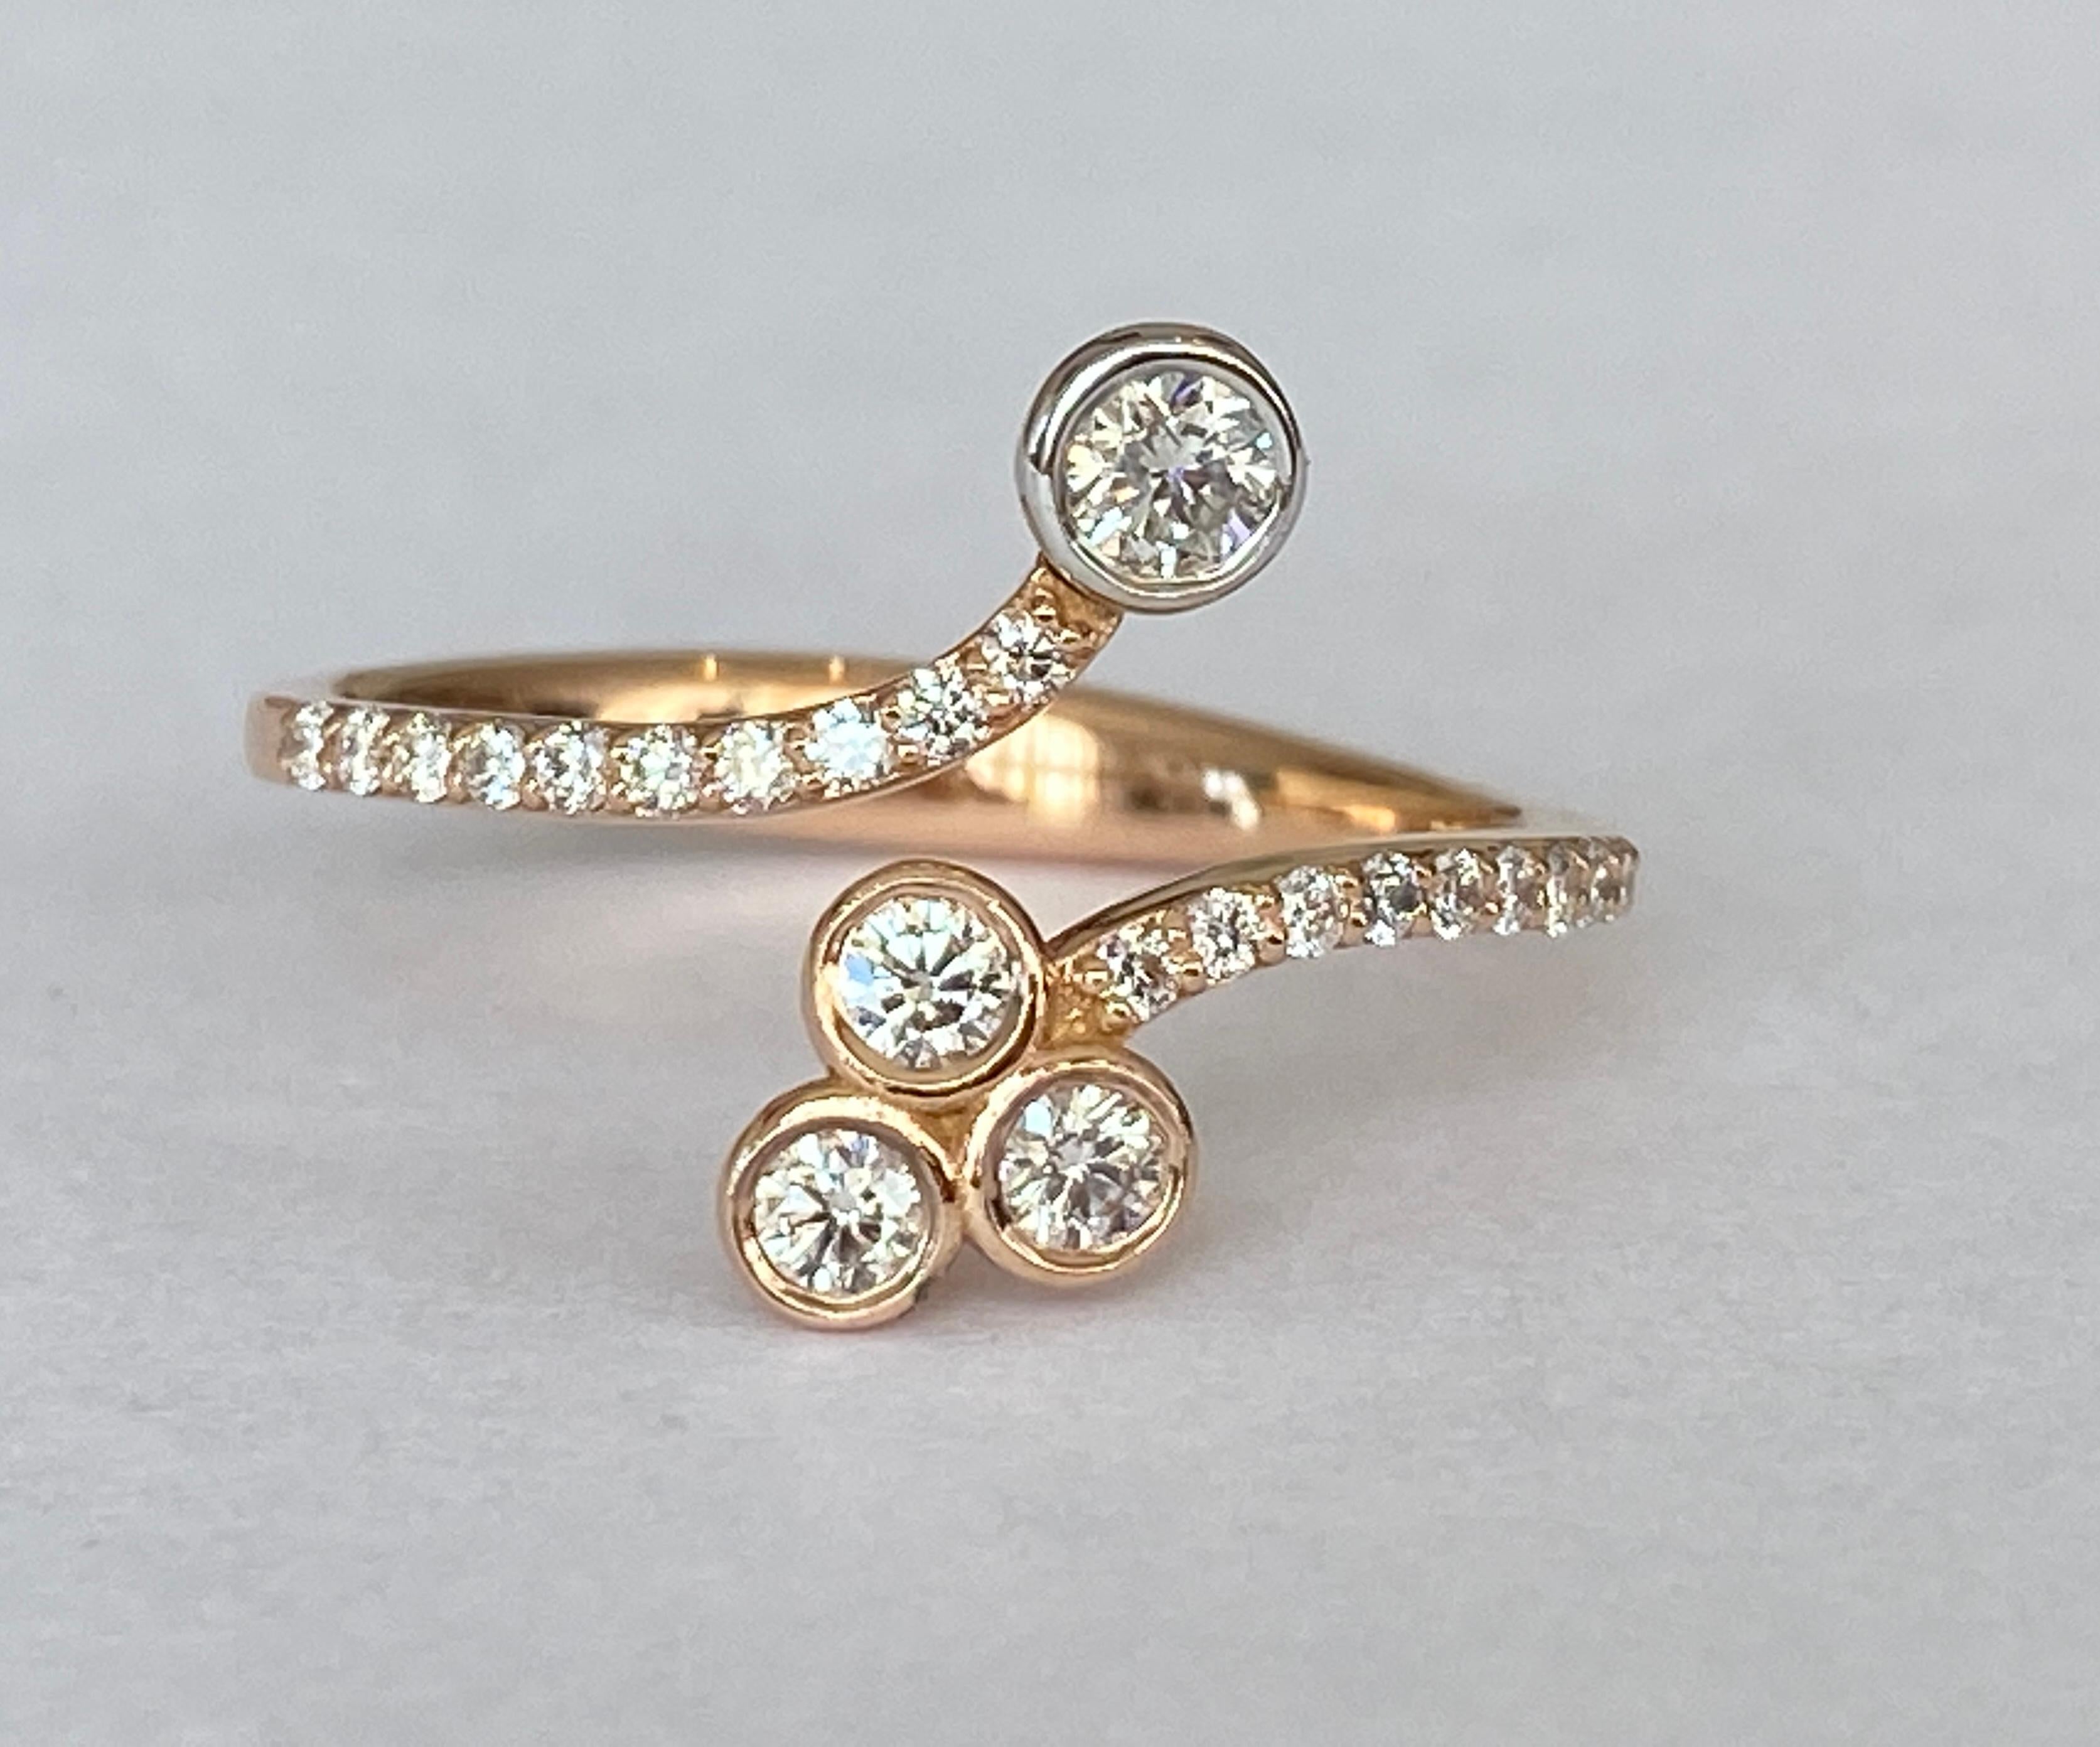 Offered 18 karat pink gold designer band ring. The ring is decorated with 23 brilliant cut diamonds in total approx. 0.45 ct quality G/VS/SI.
Content: 750 (approved)
Natural diamonds - approx. 0.45 ct
Weight: 2.6 grams
Ring size: 17.00 mm/ 6 ½ USA